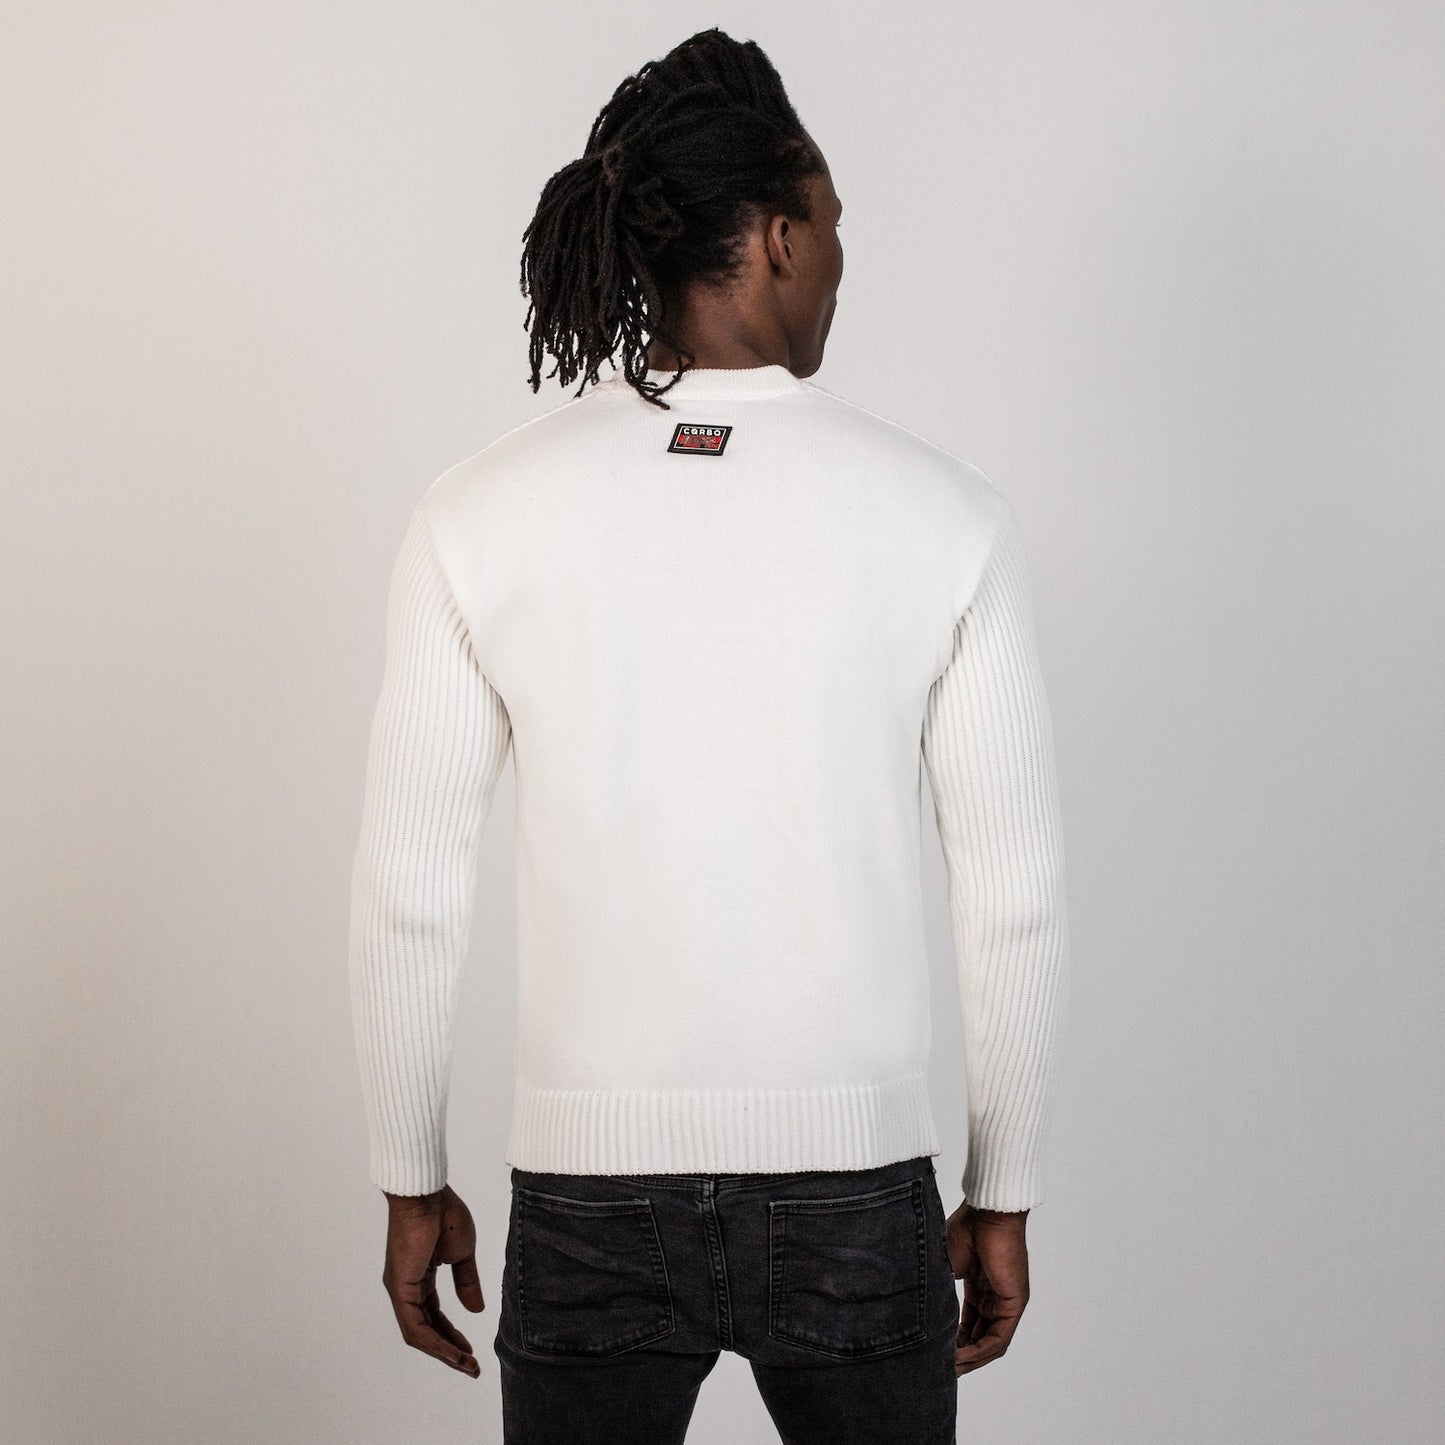 Meteor Knitted Crewneck